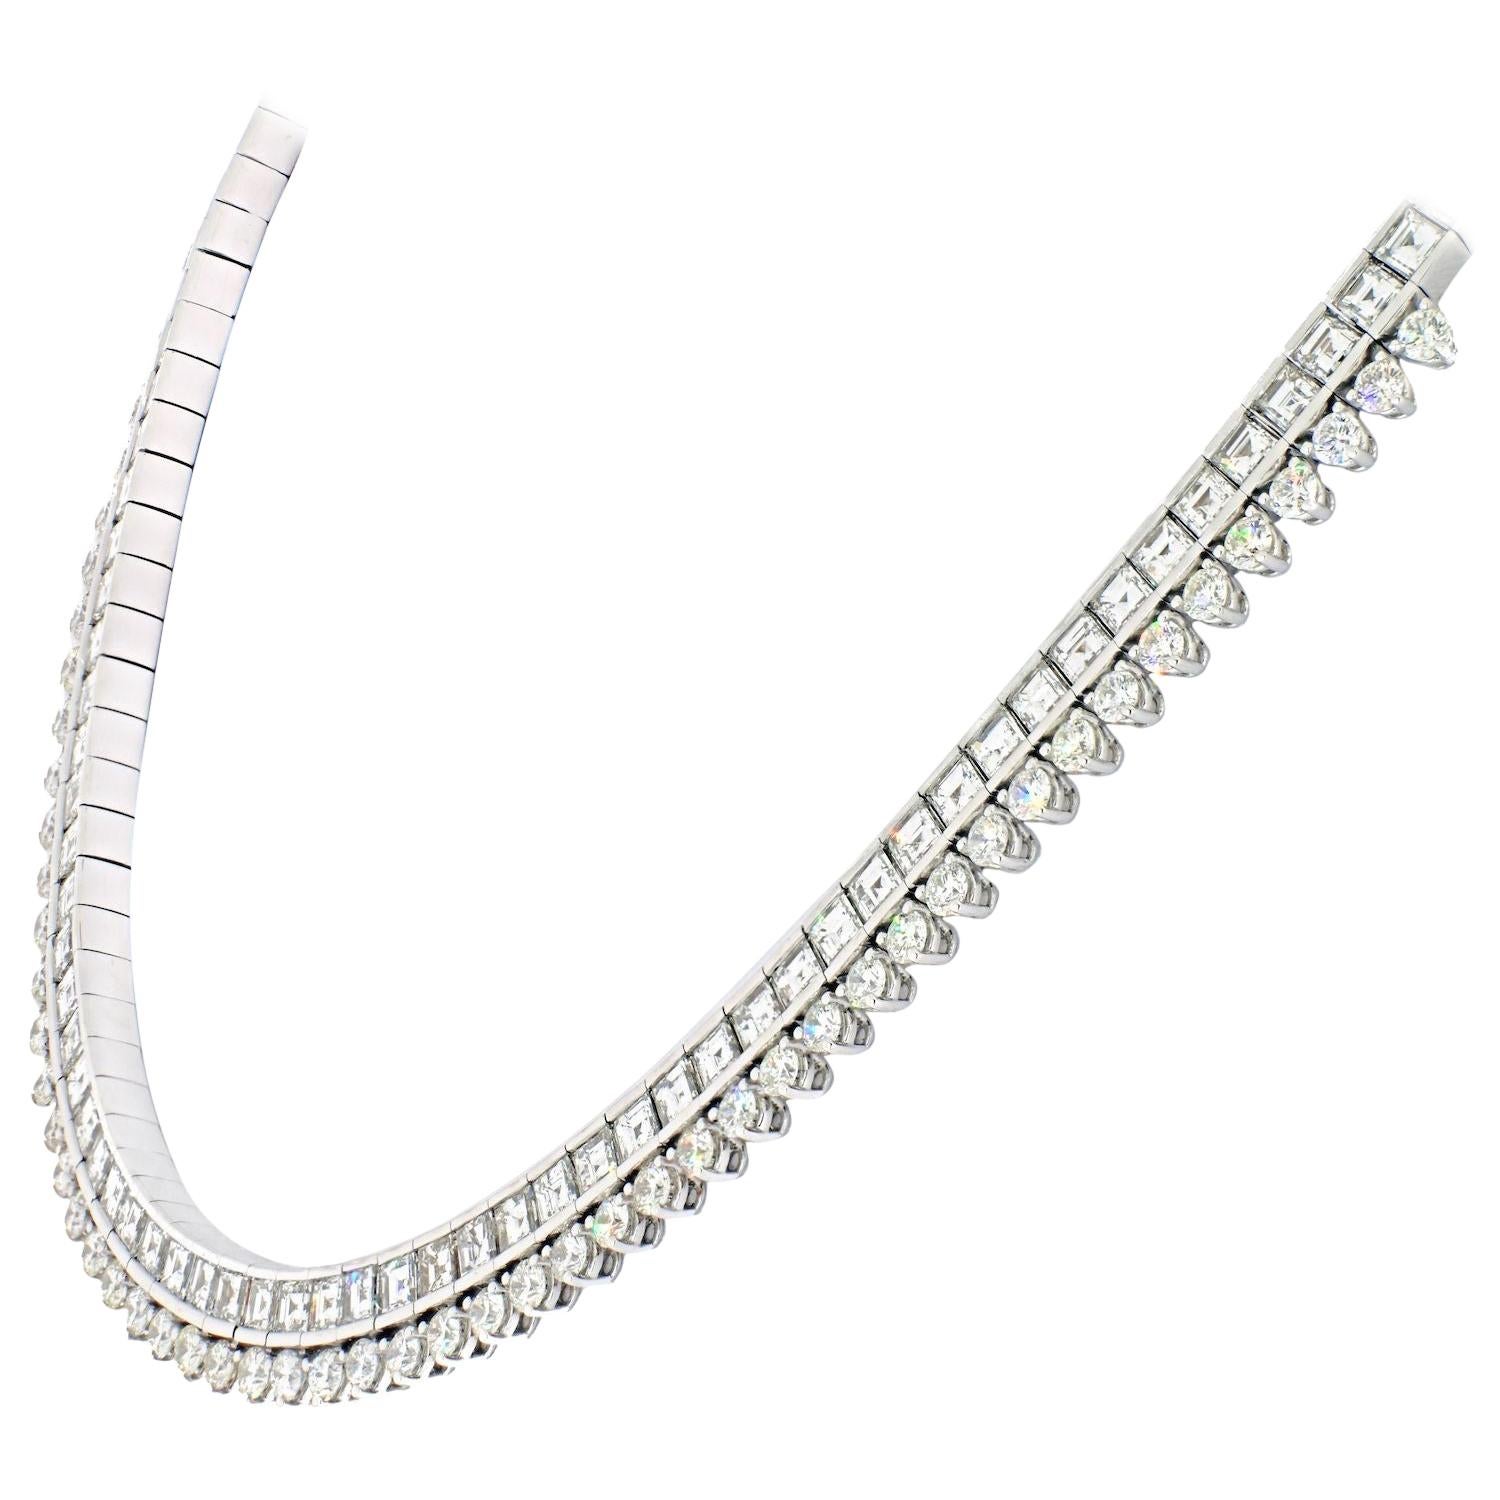 This is a stunning 18K White Gold Necklace, that is slick and simple yet carries ample amount of fire and  is looking very posh. Mounted with carre, staright cut square emeralds and rounds these shapes complement each other in a lovely straight line